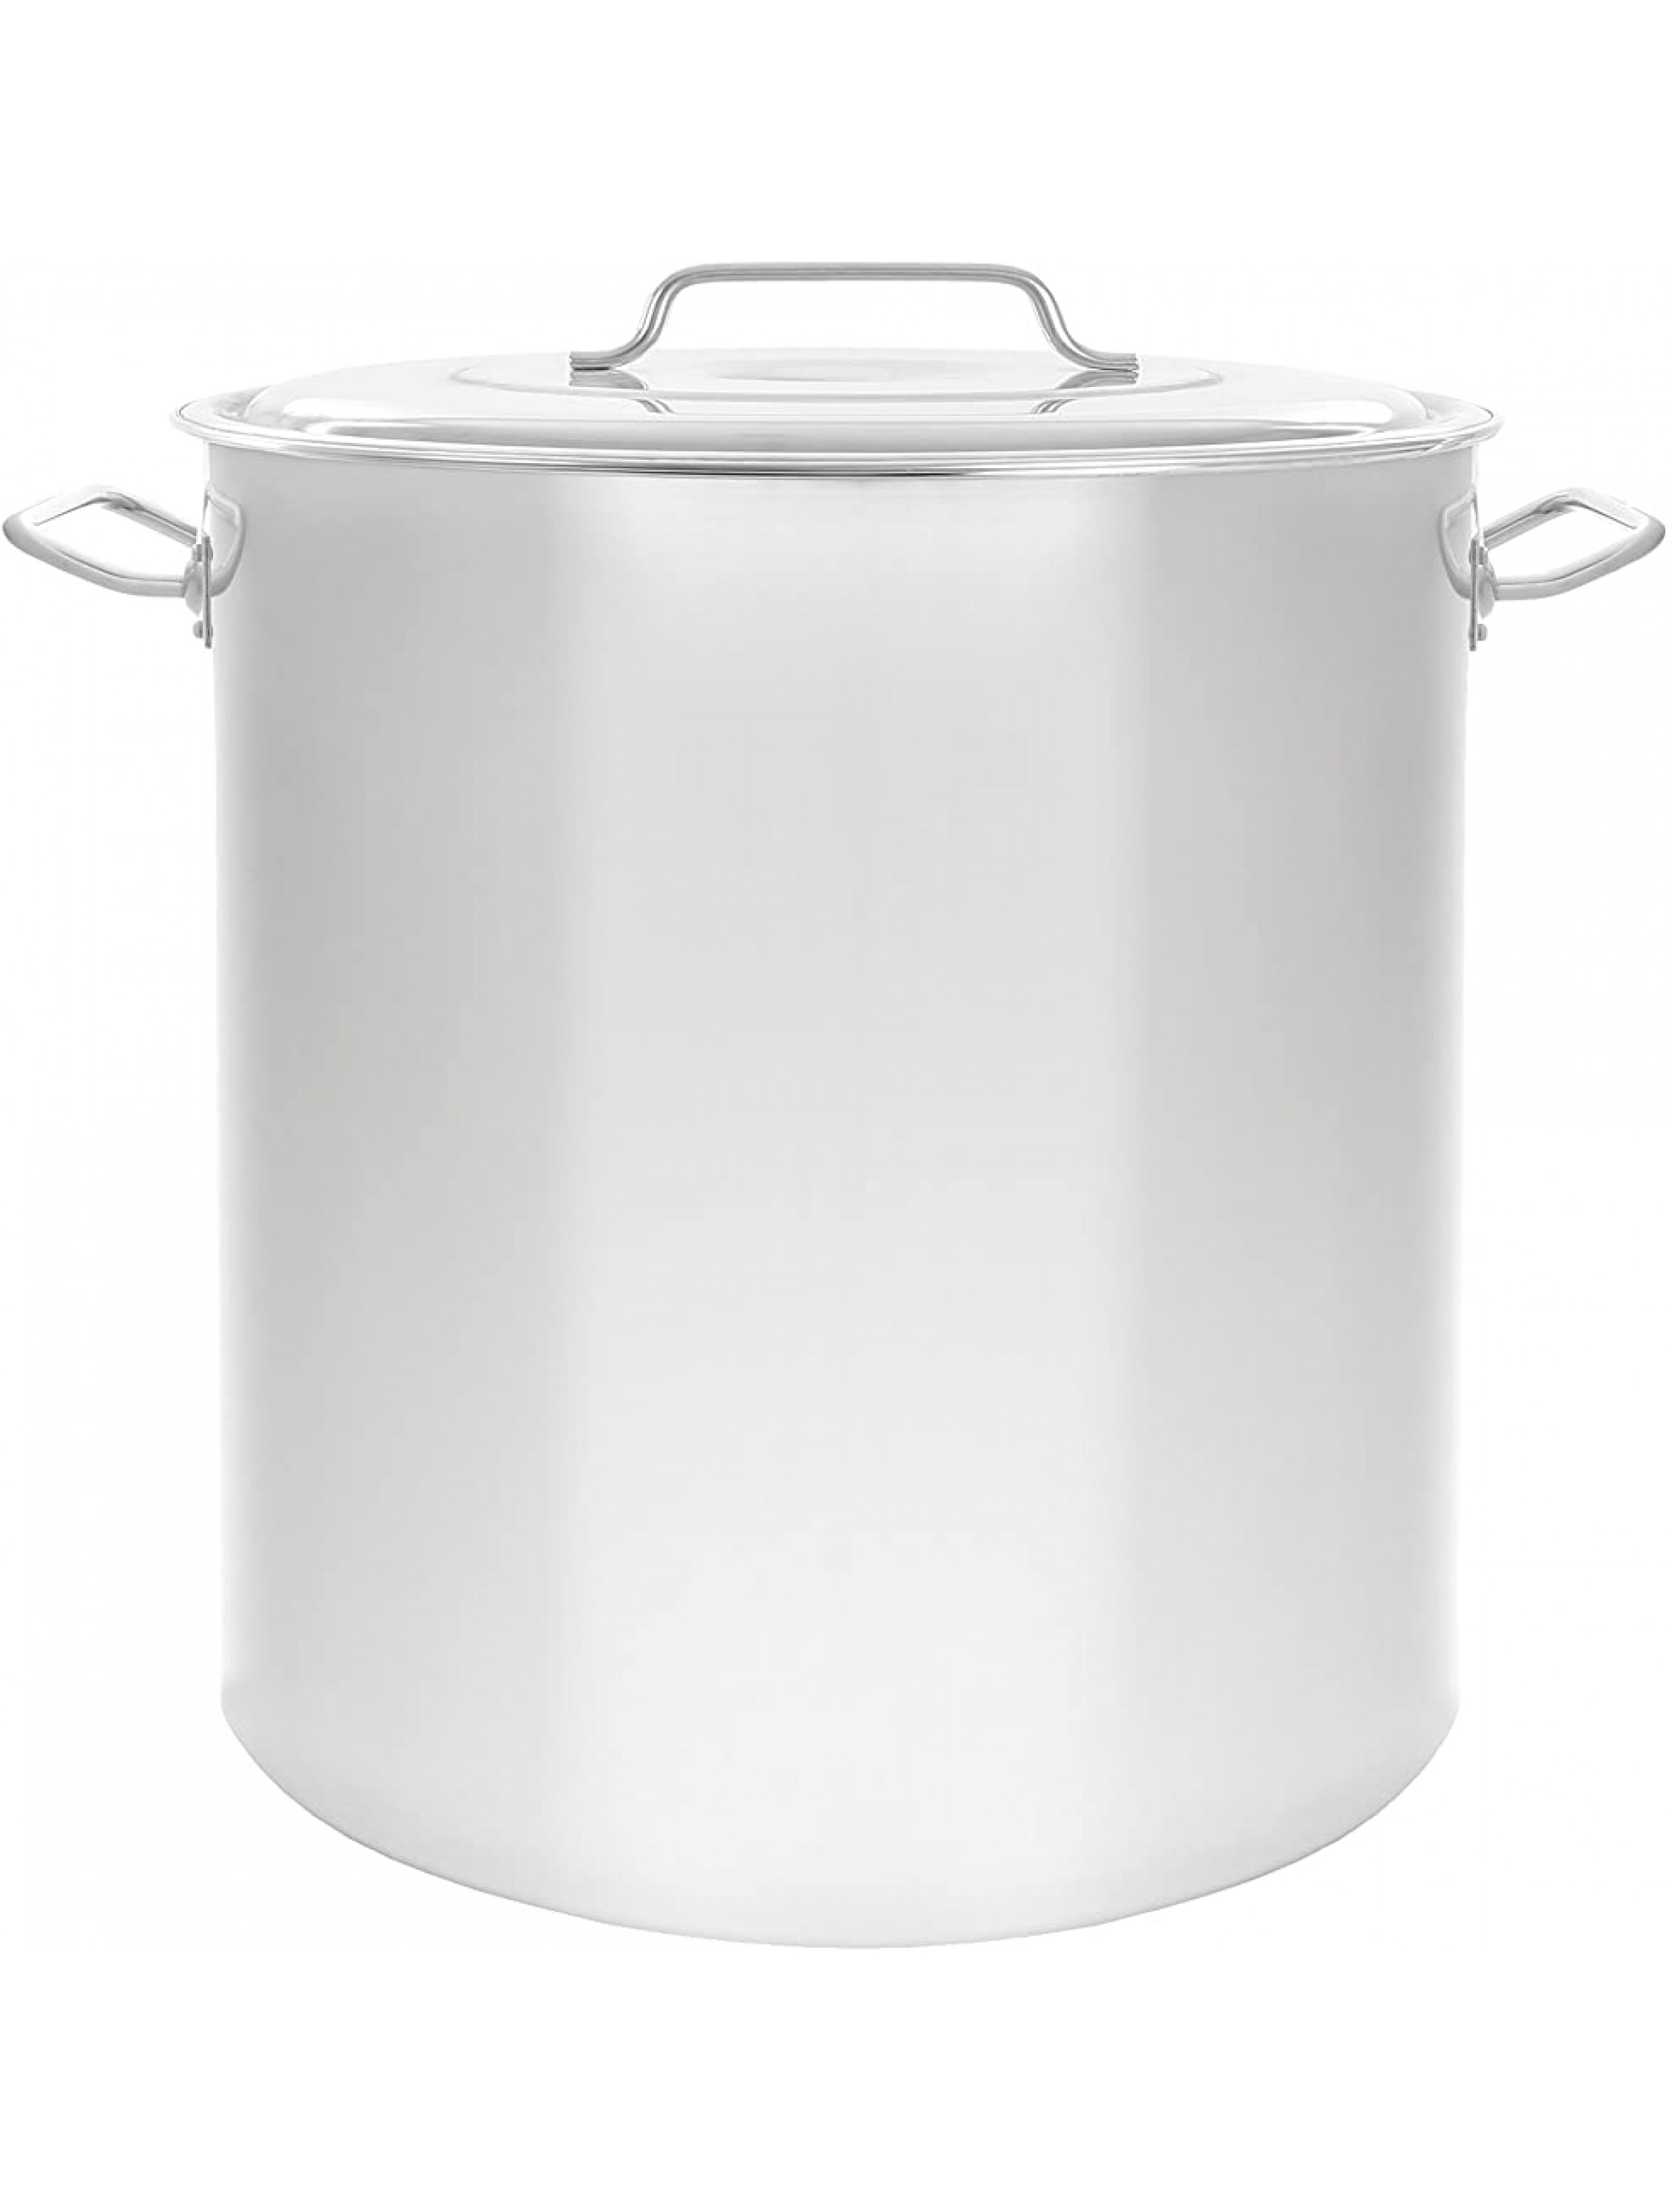 Concord Cookware Stainless Steel Stock Pot Kettle 80-Quart - B4O8VHR8T